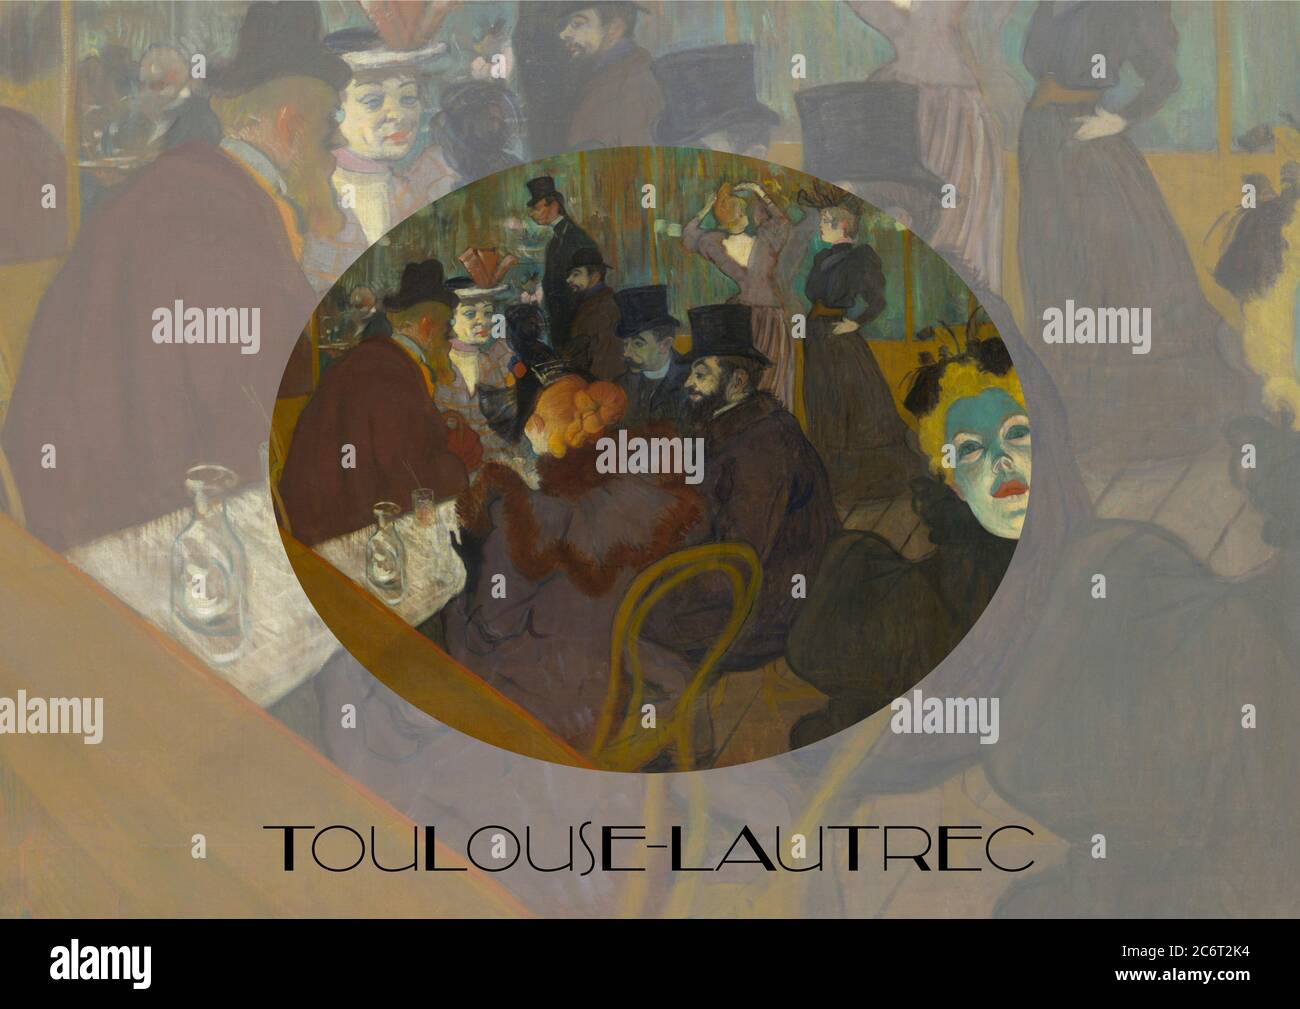 Toulouse Lautrec inspired poster art - At the Moulin Rouge Stock Photo